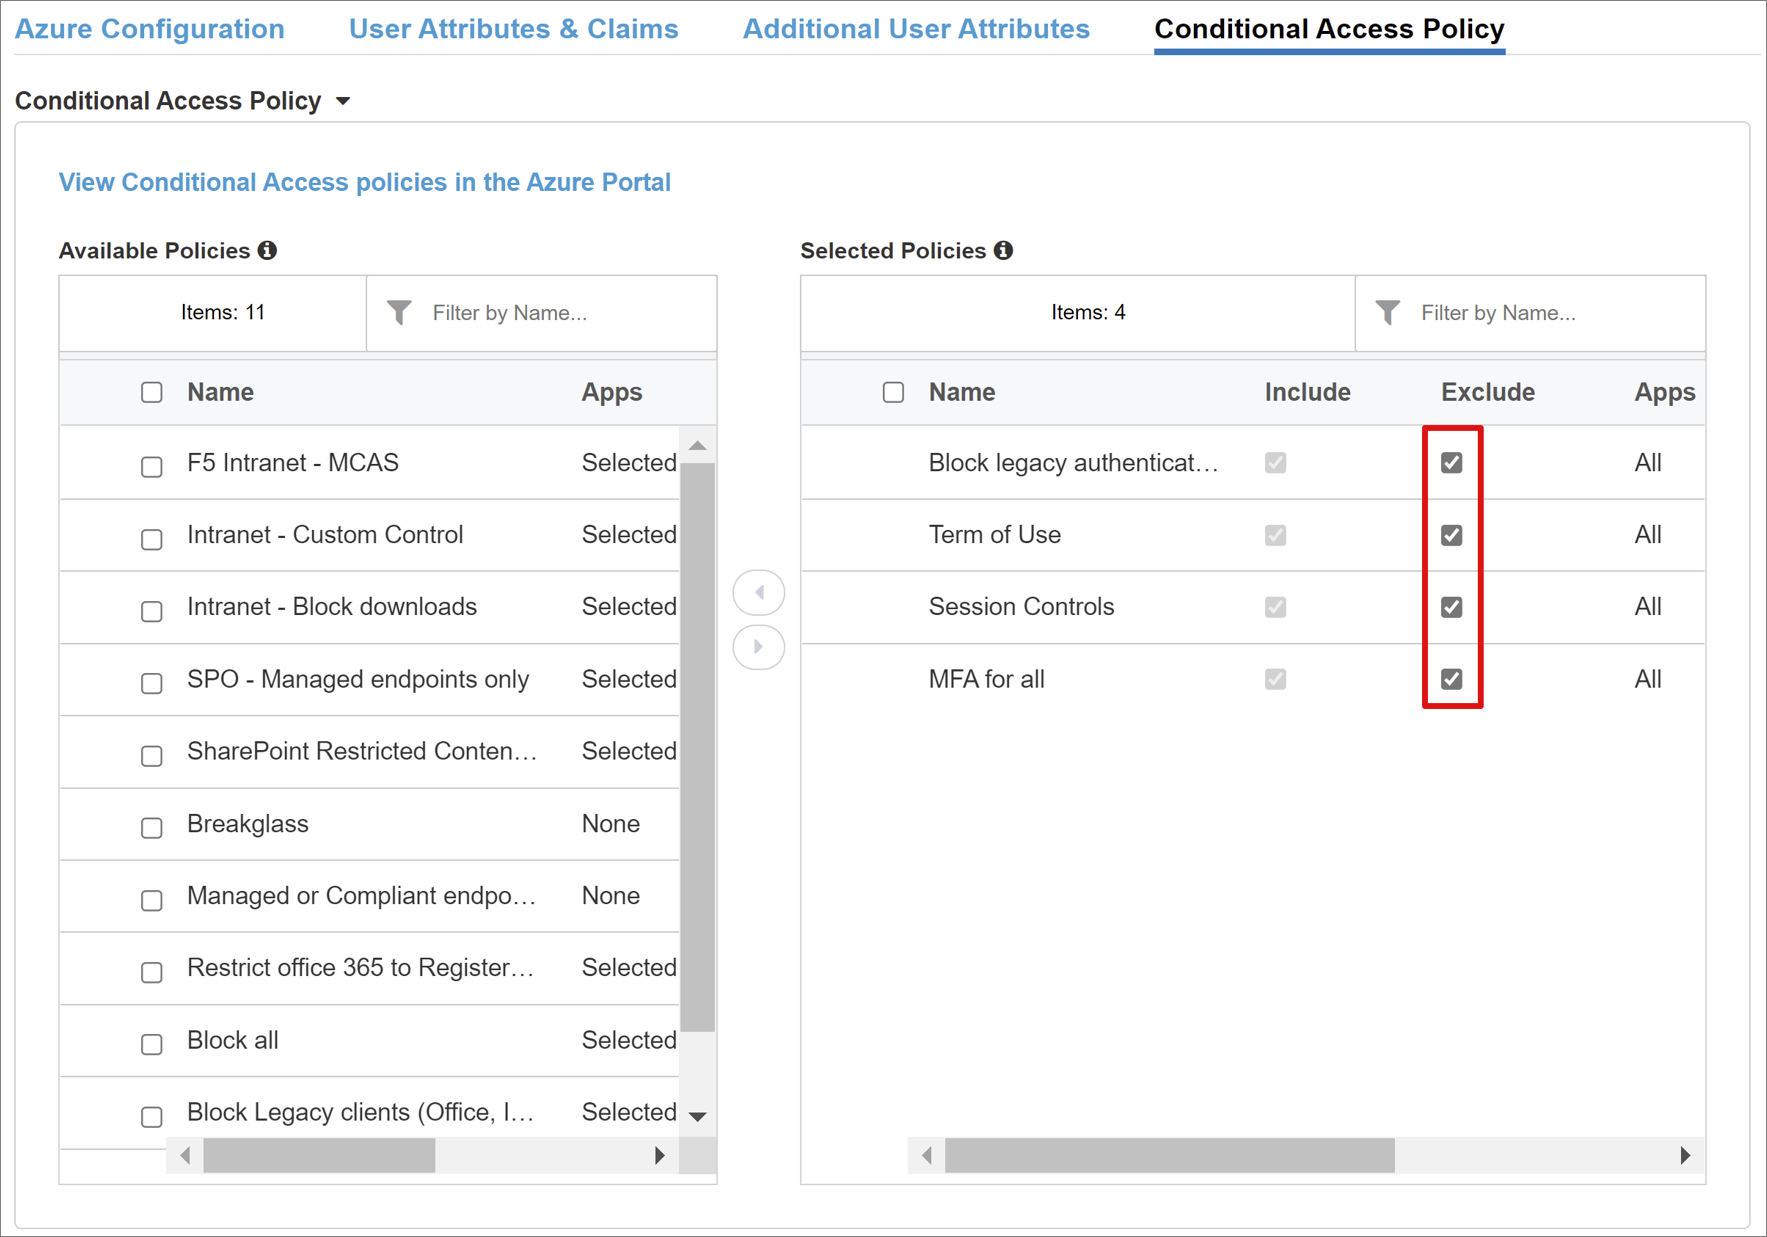 Screenshot of excluded policies under Selected Policies on the Conditional Access Policy tab.